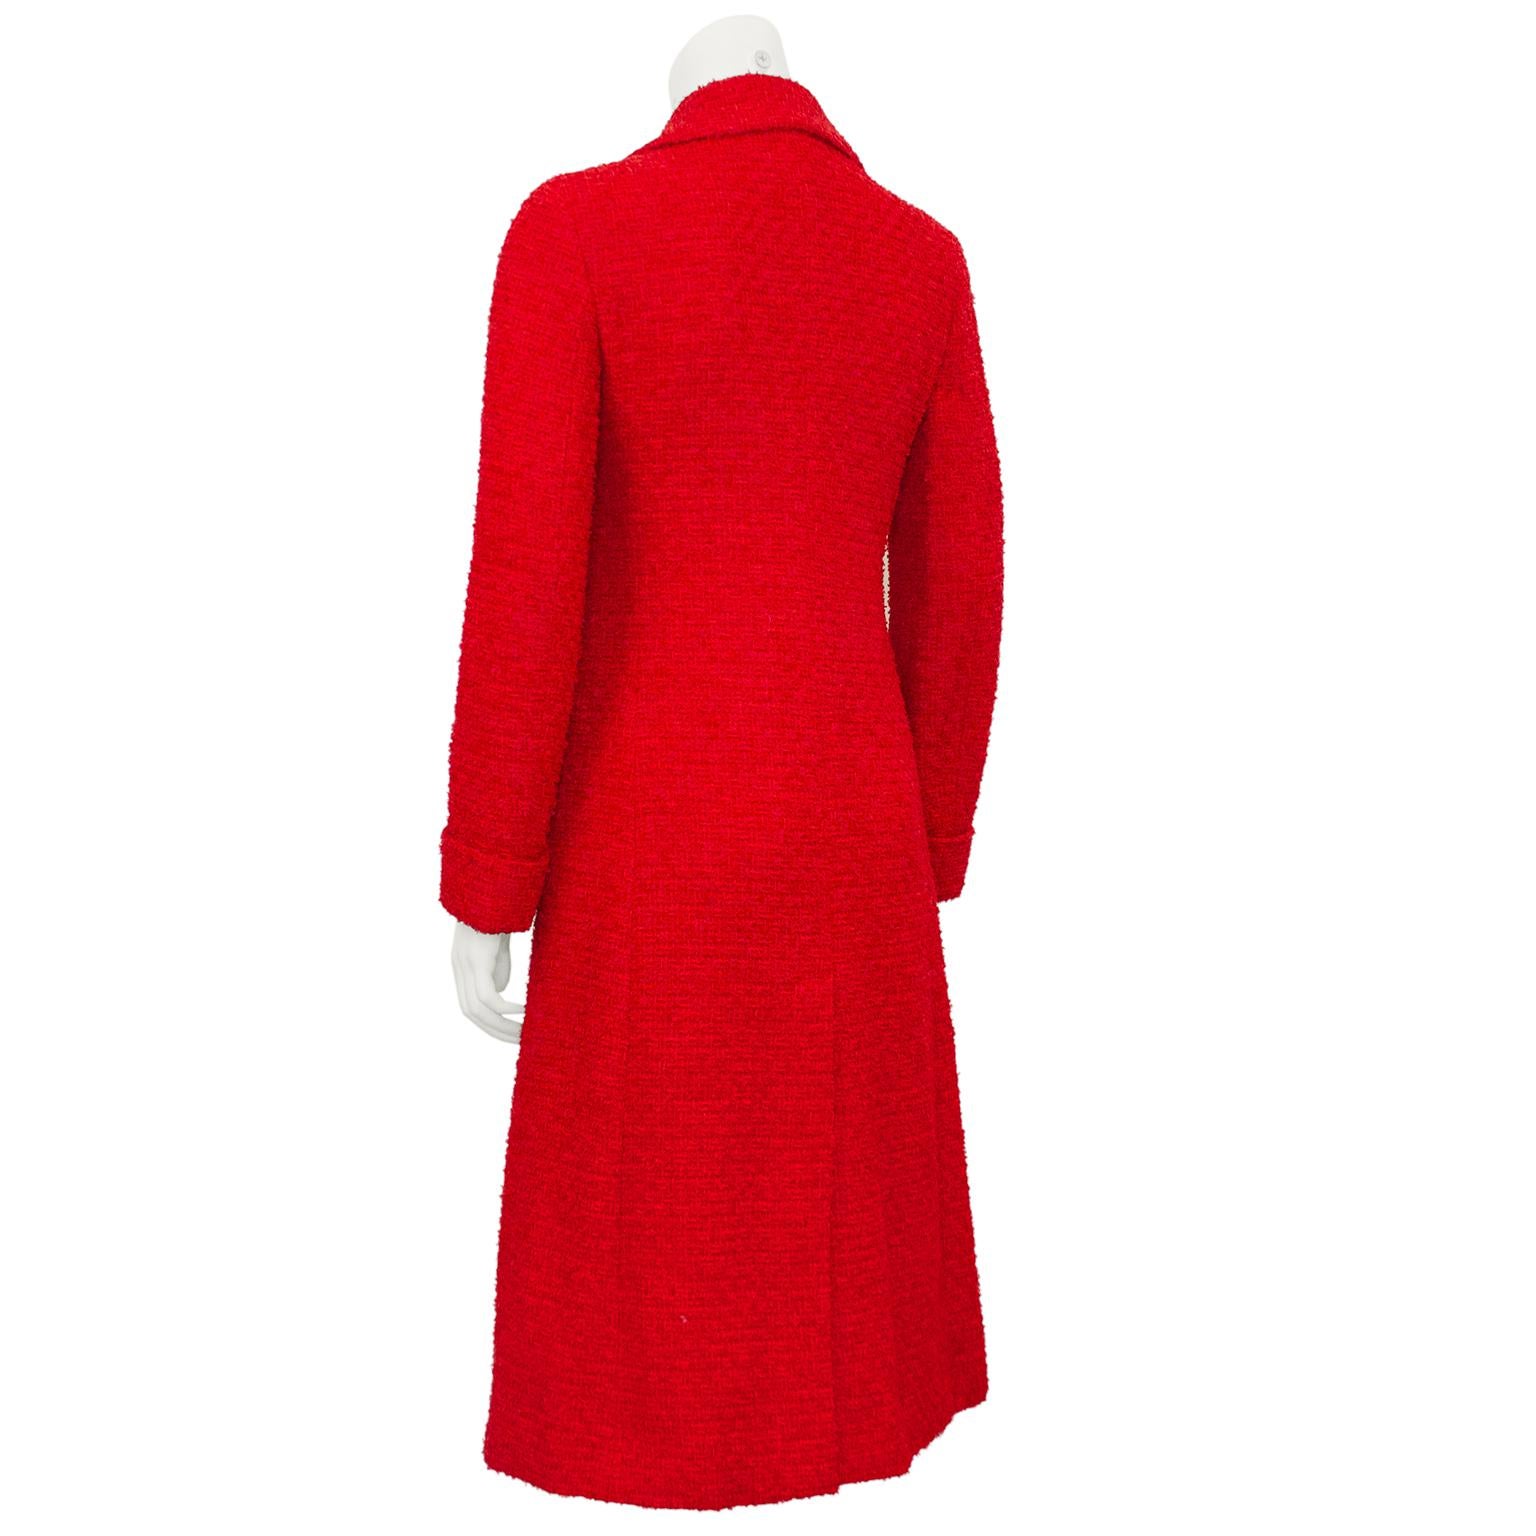 Gucci Red Tweed Long Jacket with Gold Buttons  In Excellent Condition For Sale In Toronto, Ontario